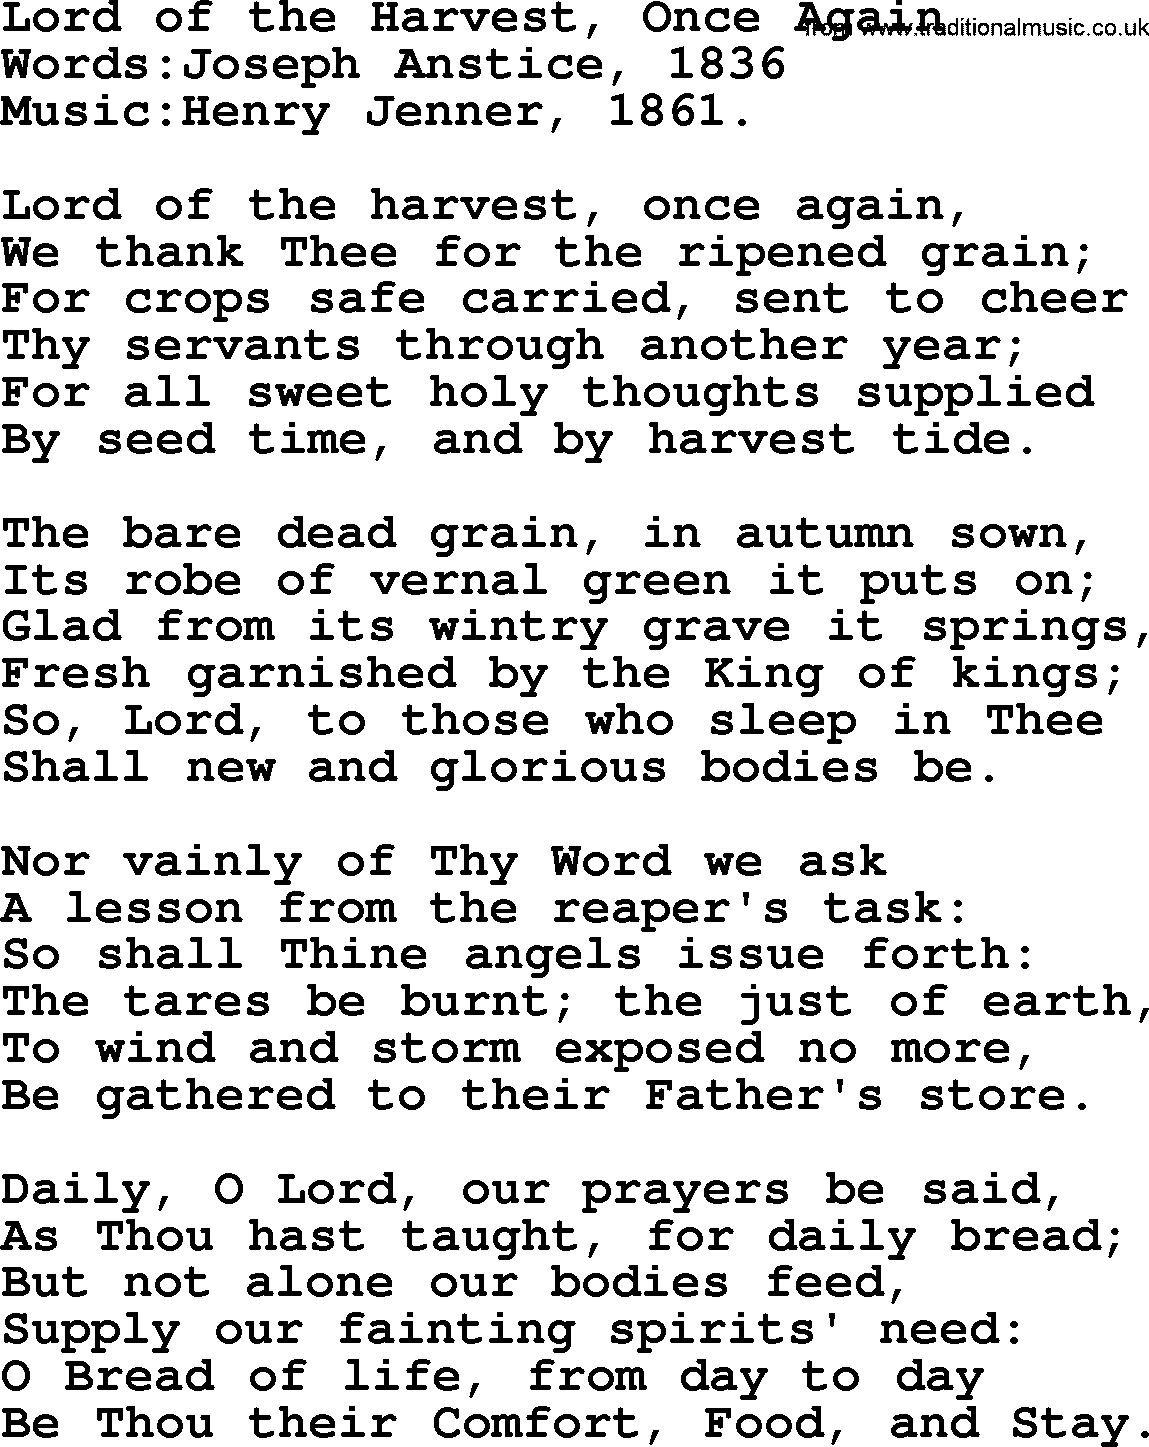 Christian hymns and songs about Jesus' Return(The Second Coming): Lord Of The Harvest, Once Again, lyrics with PDF